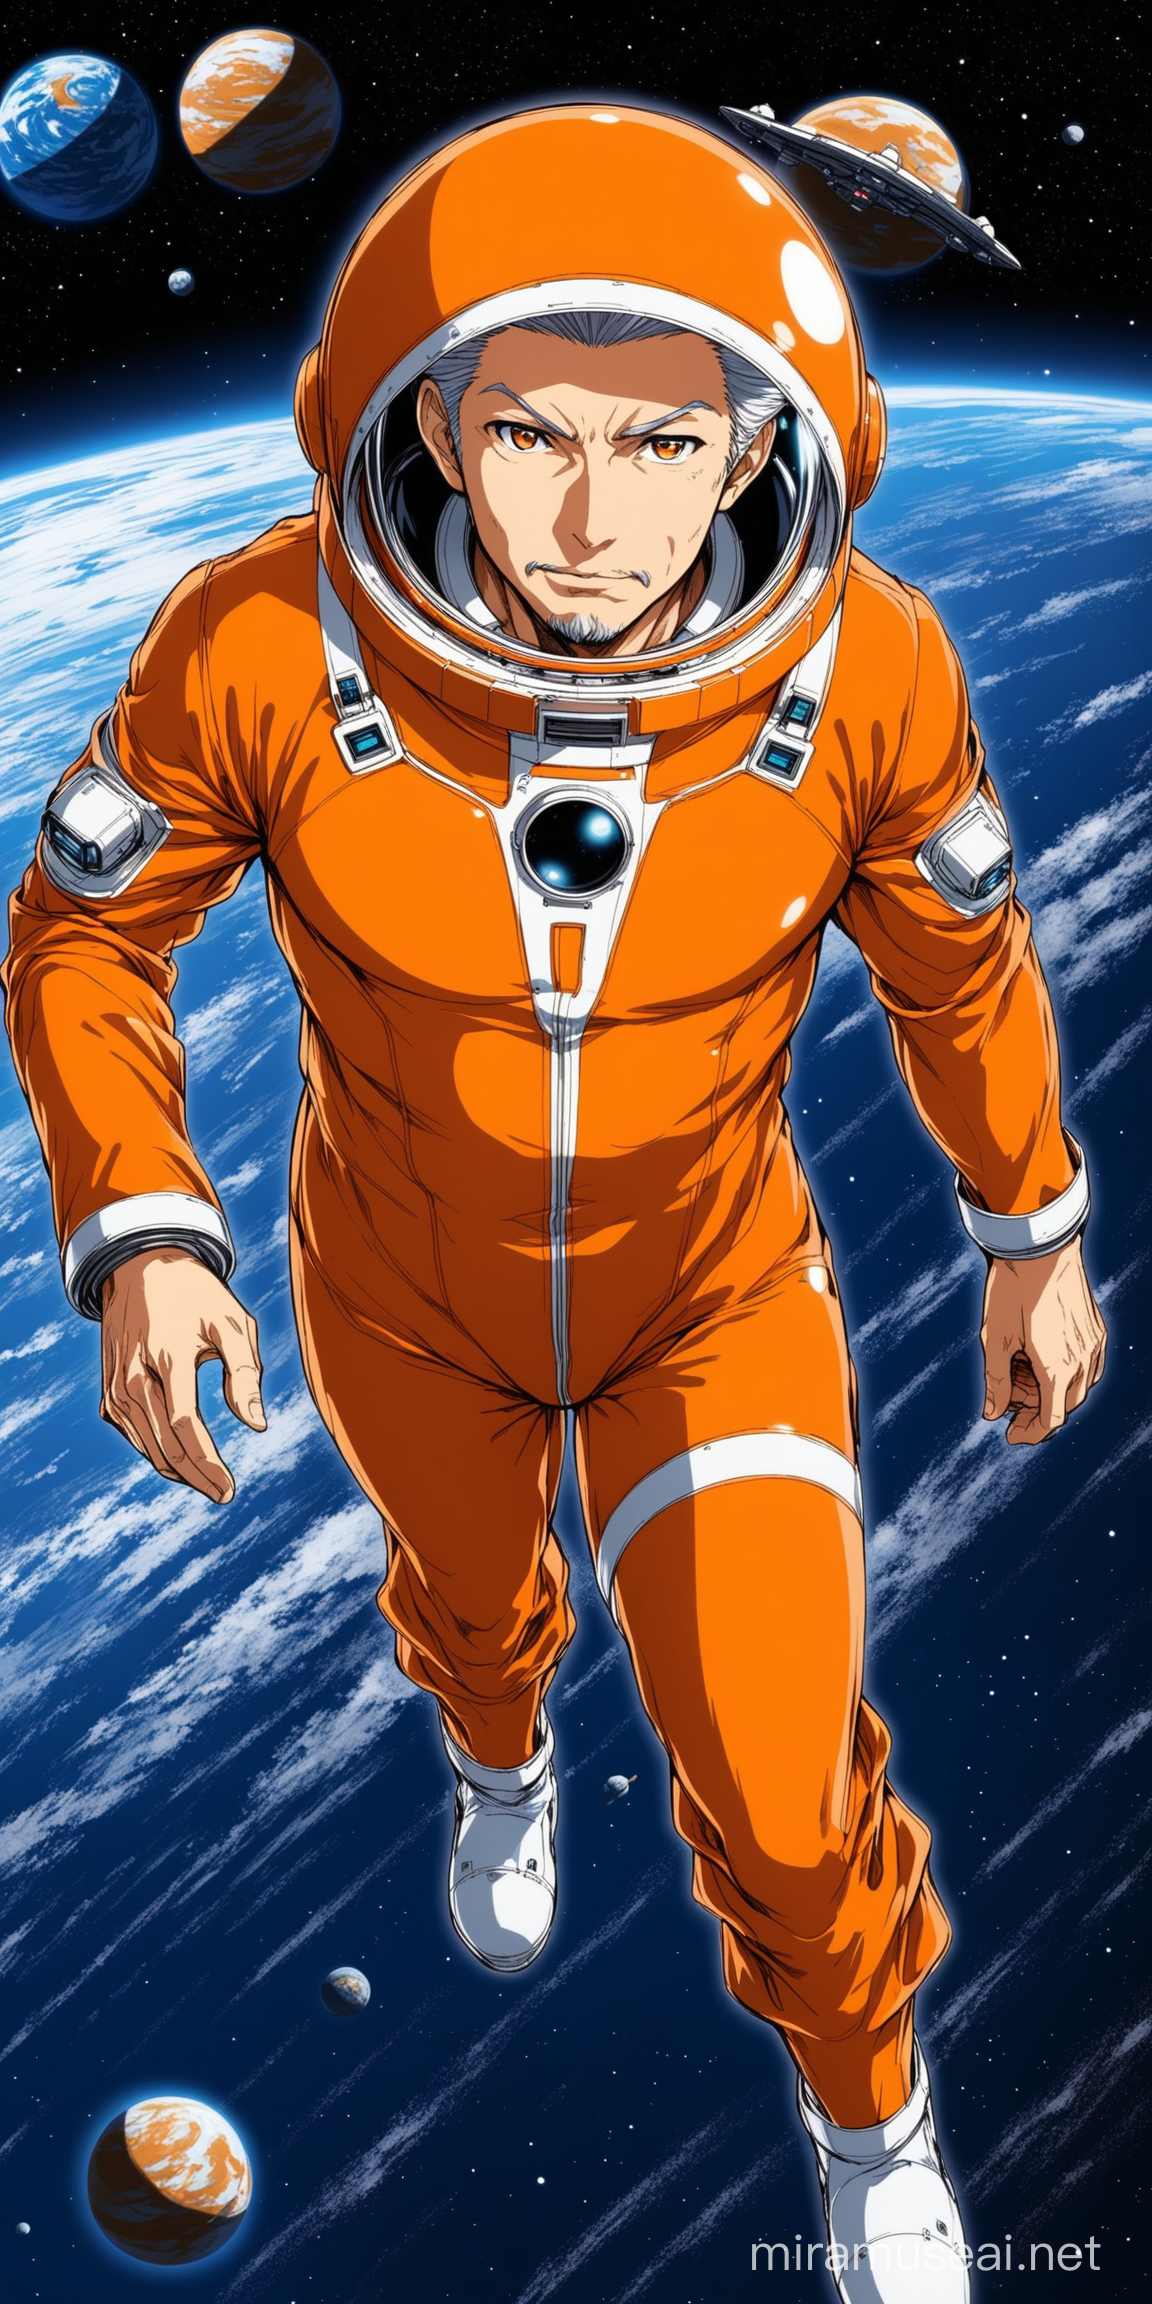 anime men about 50 years old waering an orange castume of the space ship
